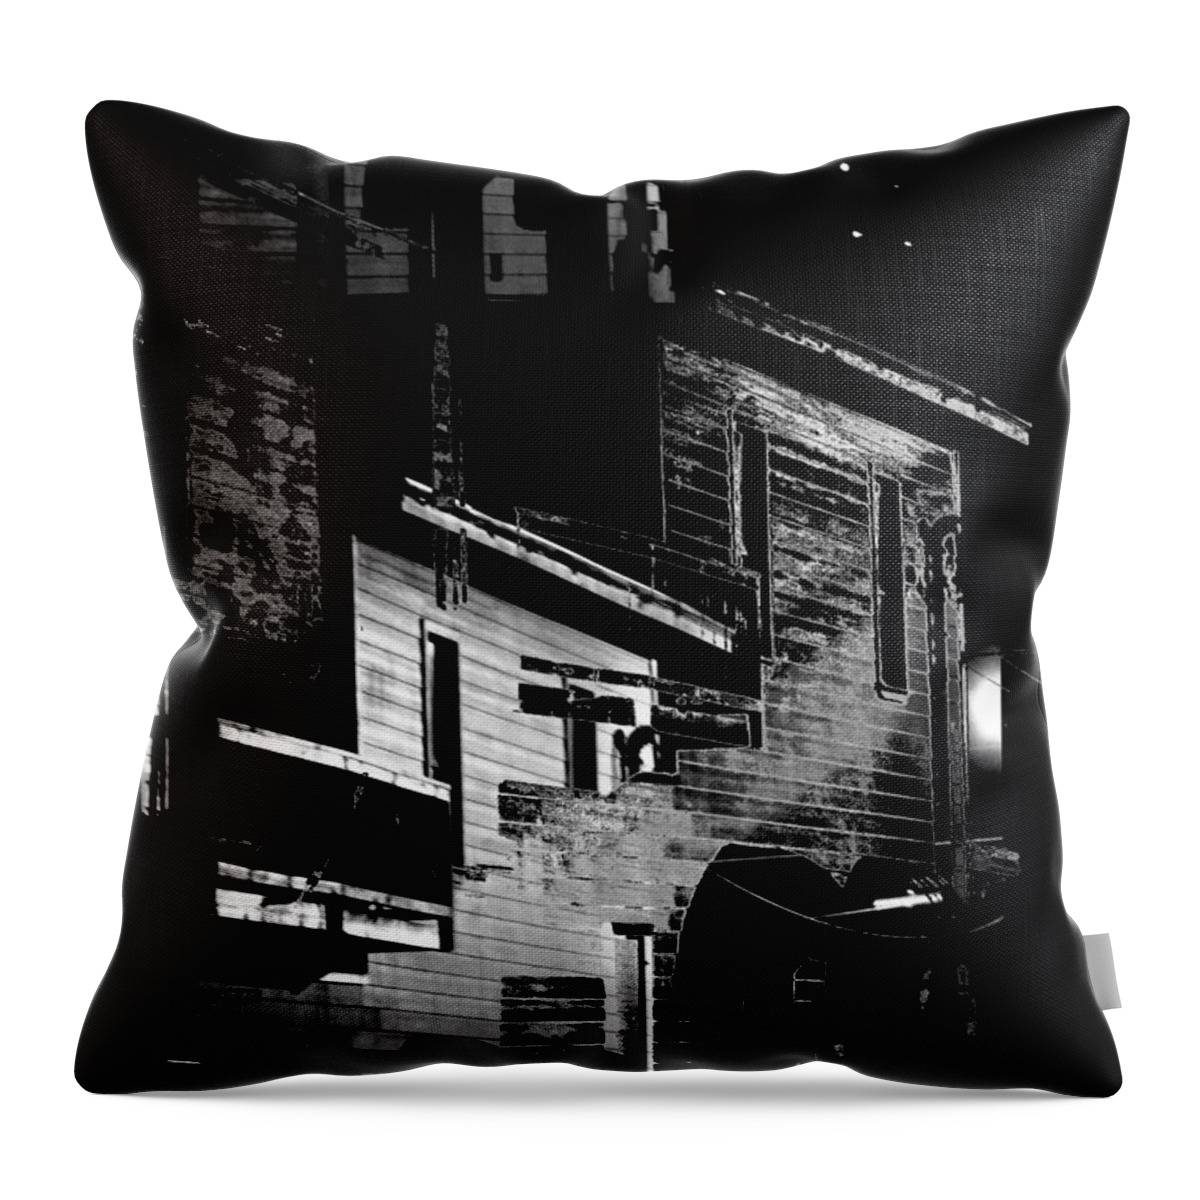 Black And White Throw Pillow featuring the photograph The Ghosts Of Winchester by Nicholas Haddox